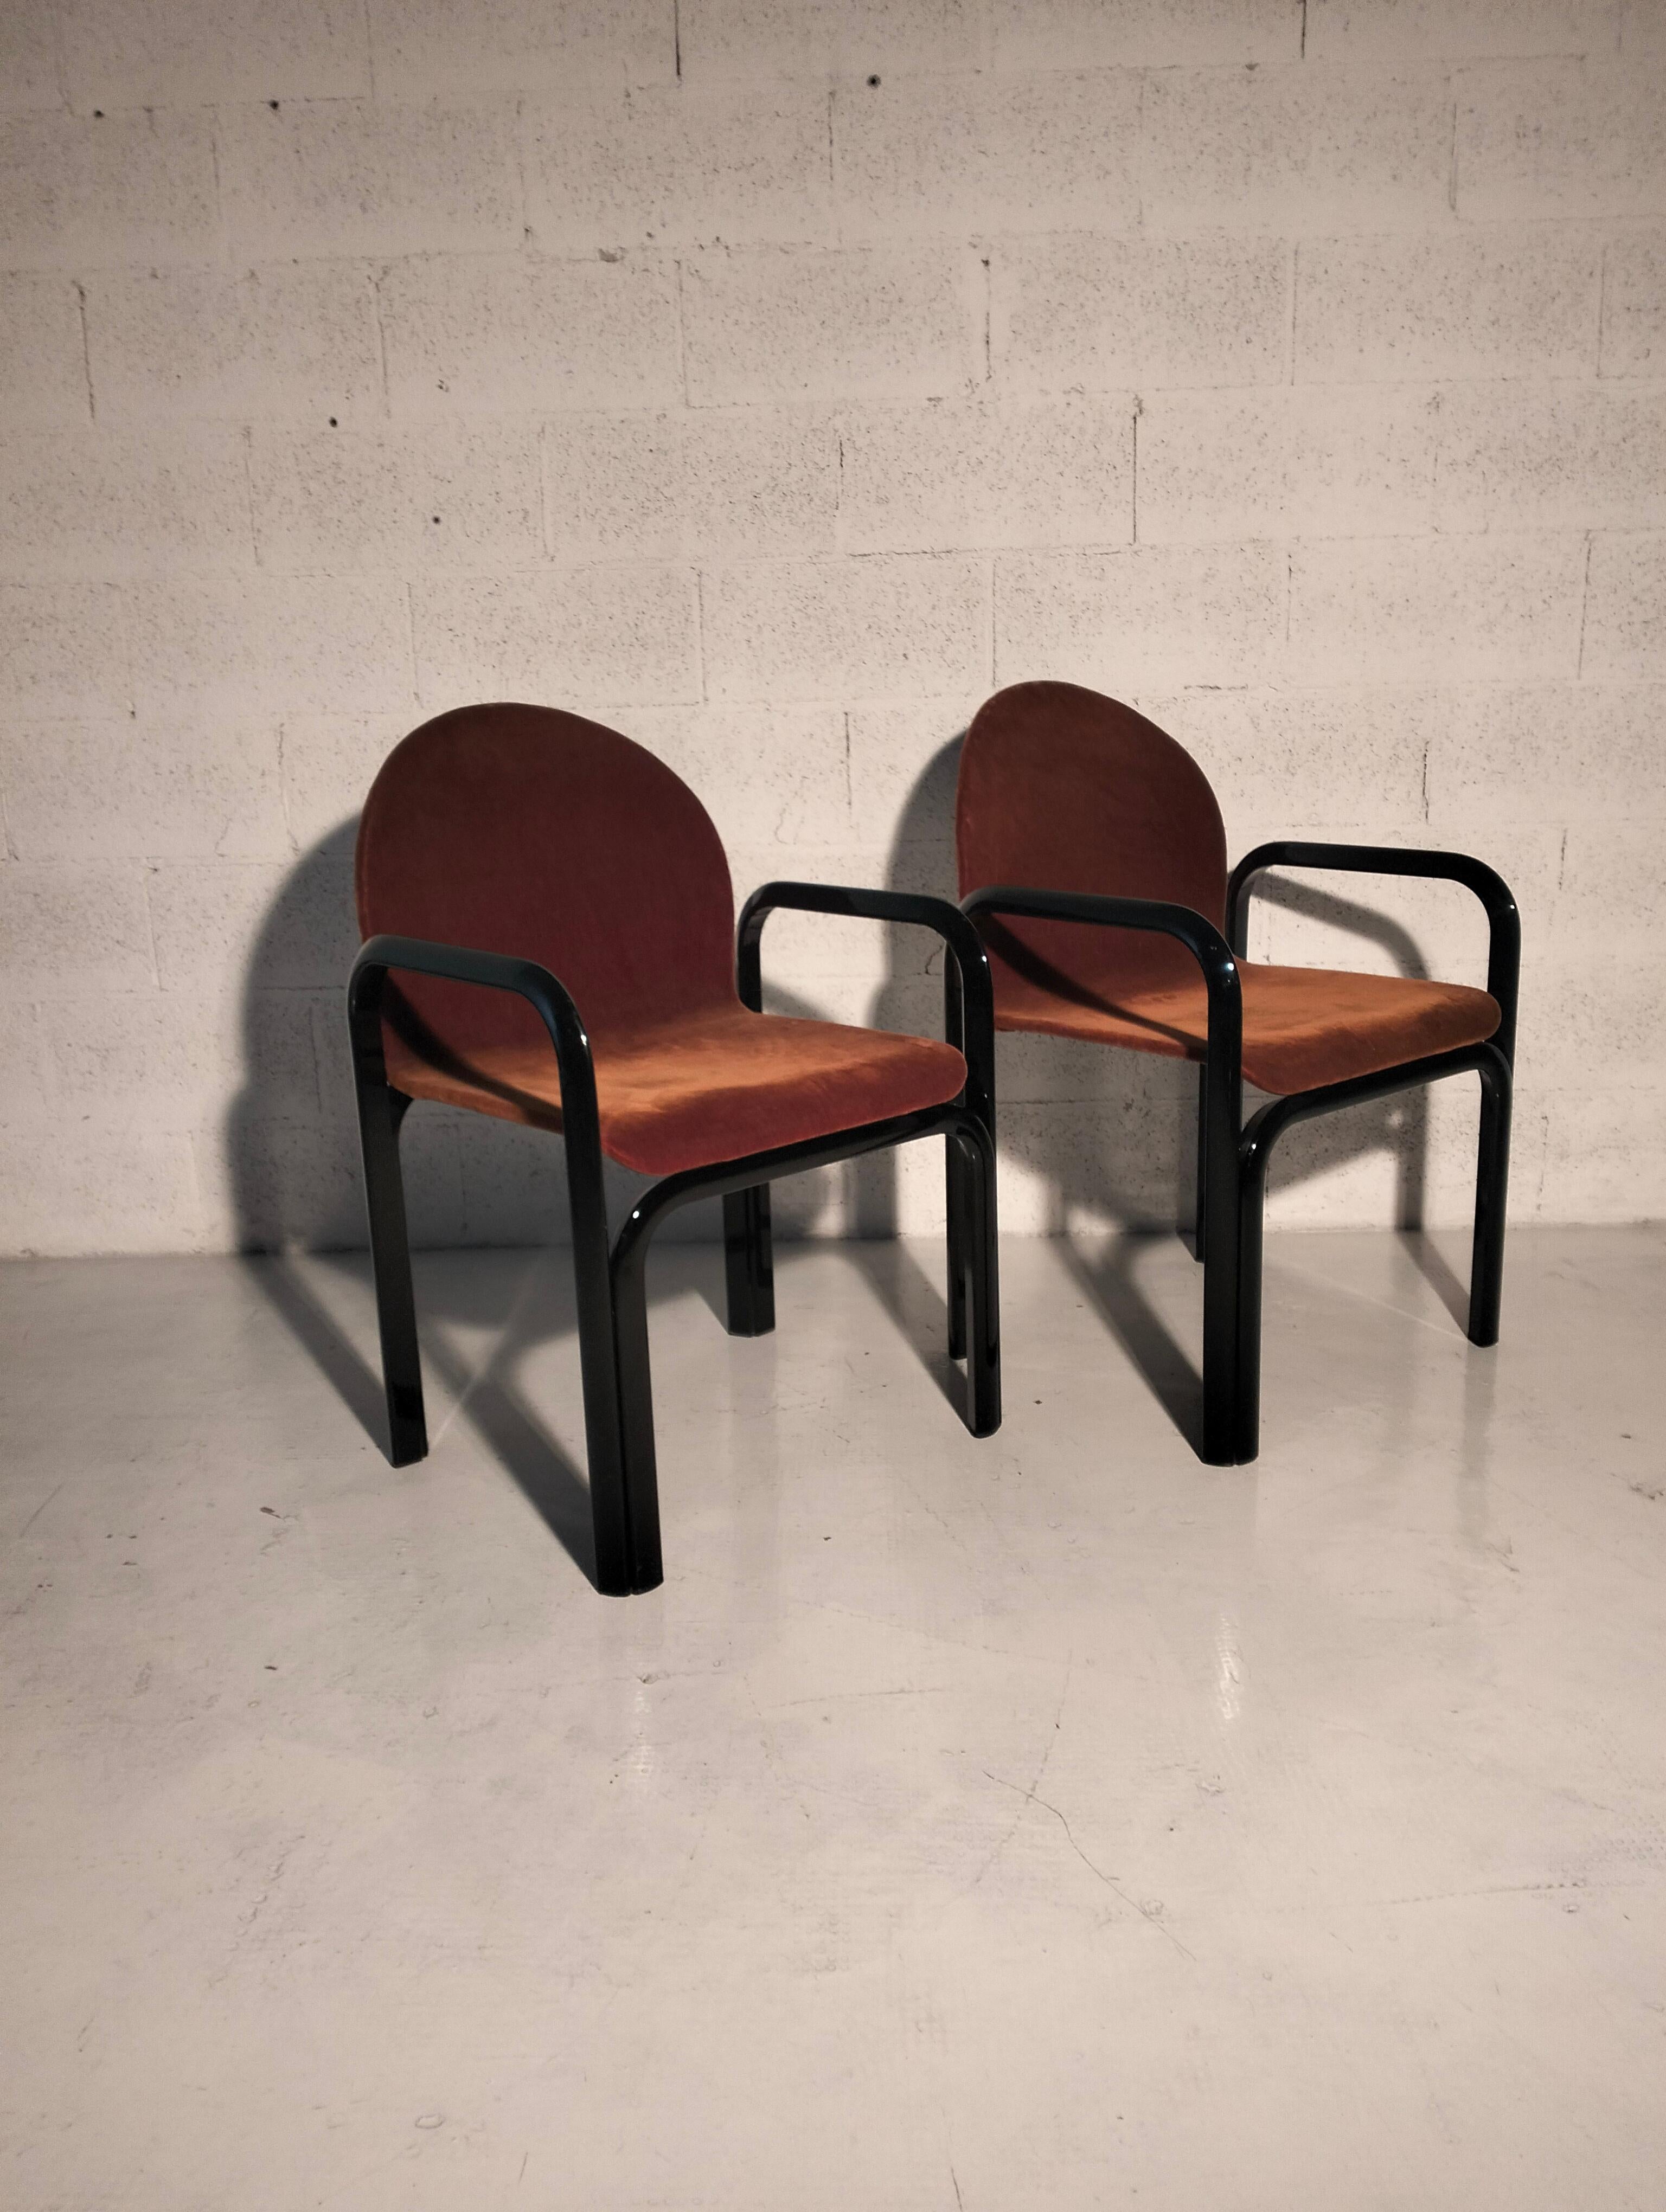 Set of 4 chairs and 1 square table Orsay mod. by Gae Aulenti for Knoll 80s For Sale 4